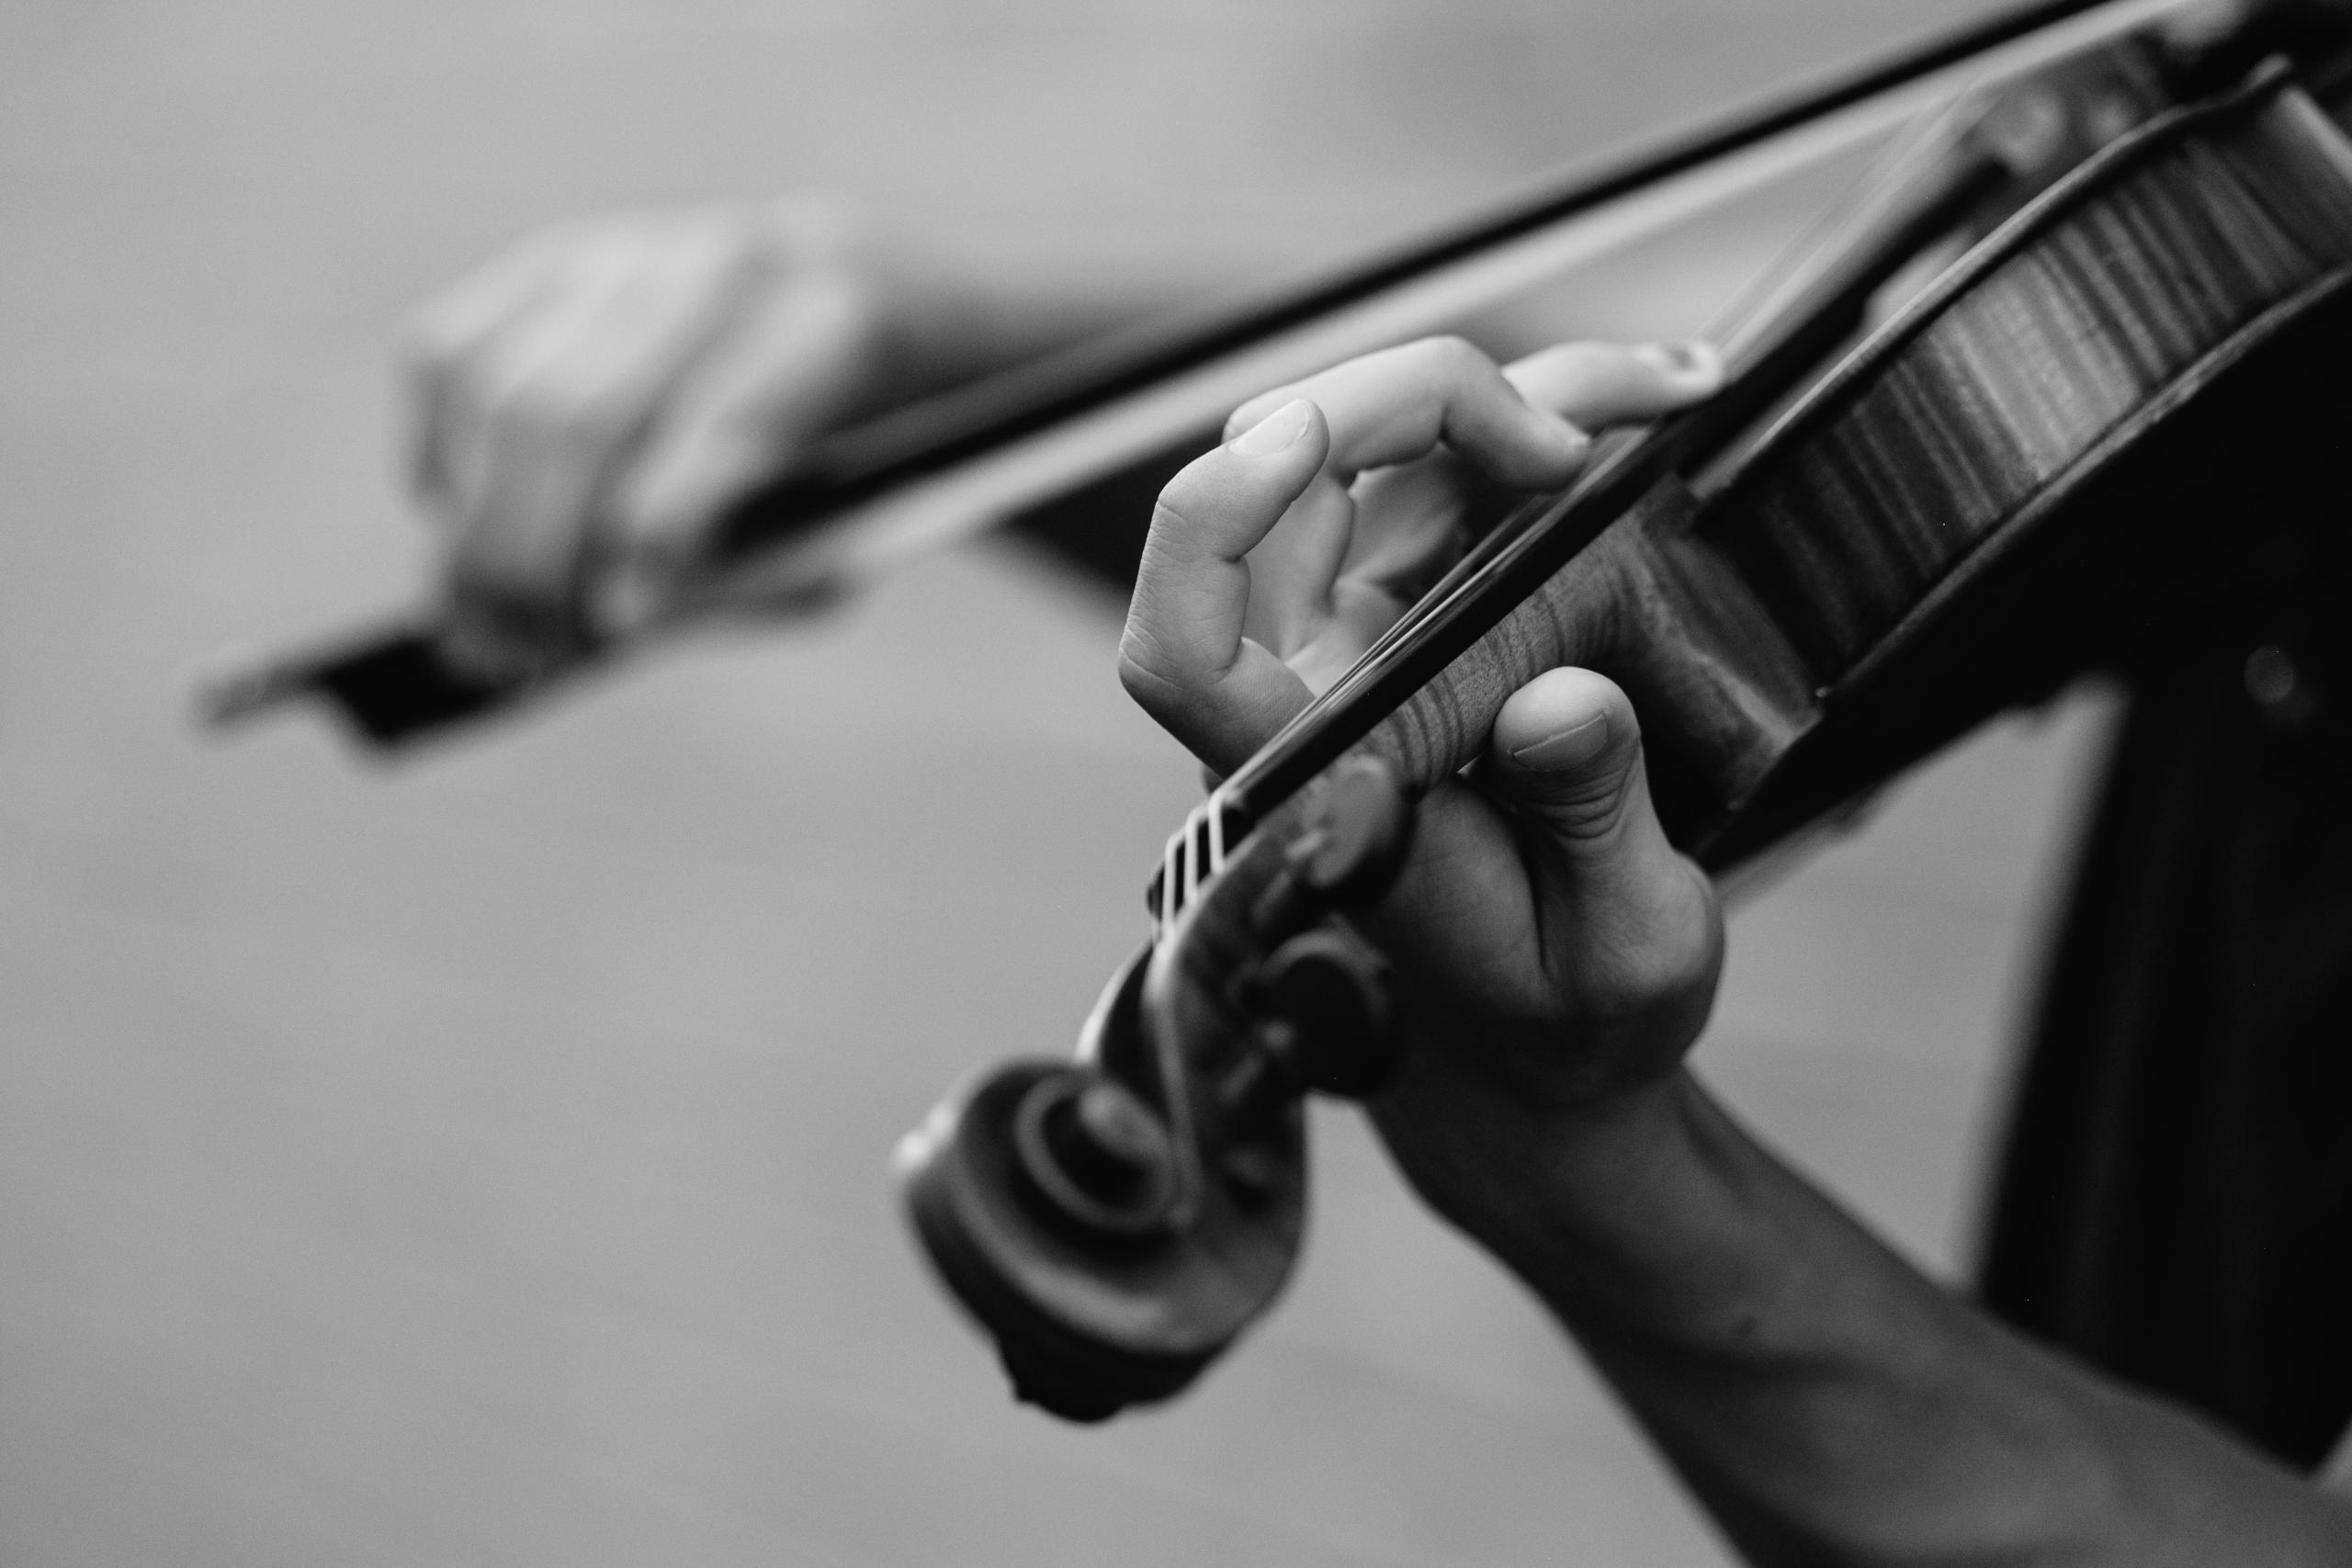 Close-up of a violin and the hand of the person playing it.